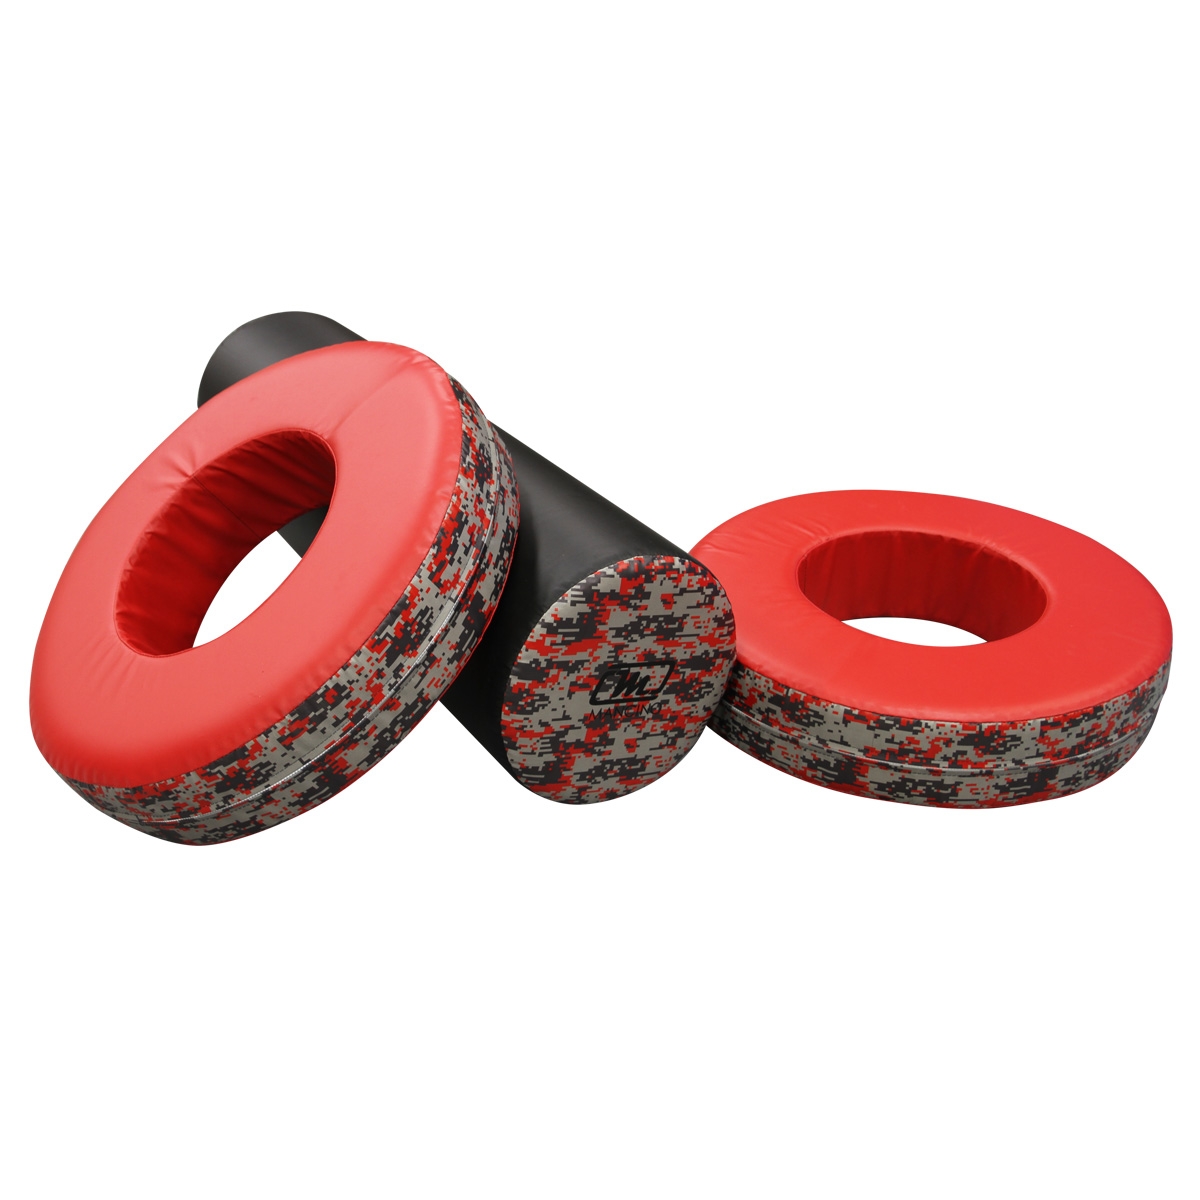 warrior fitness axle components wheels and log | Mancino Mats